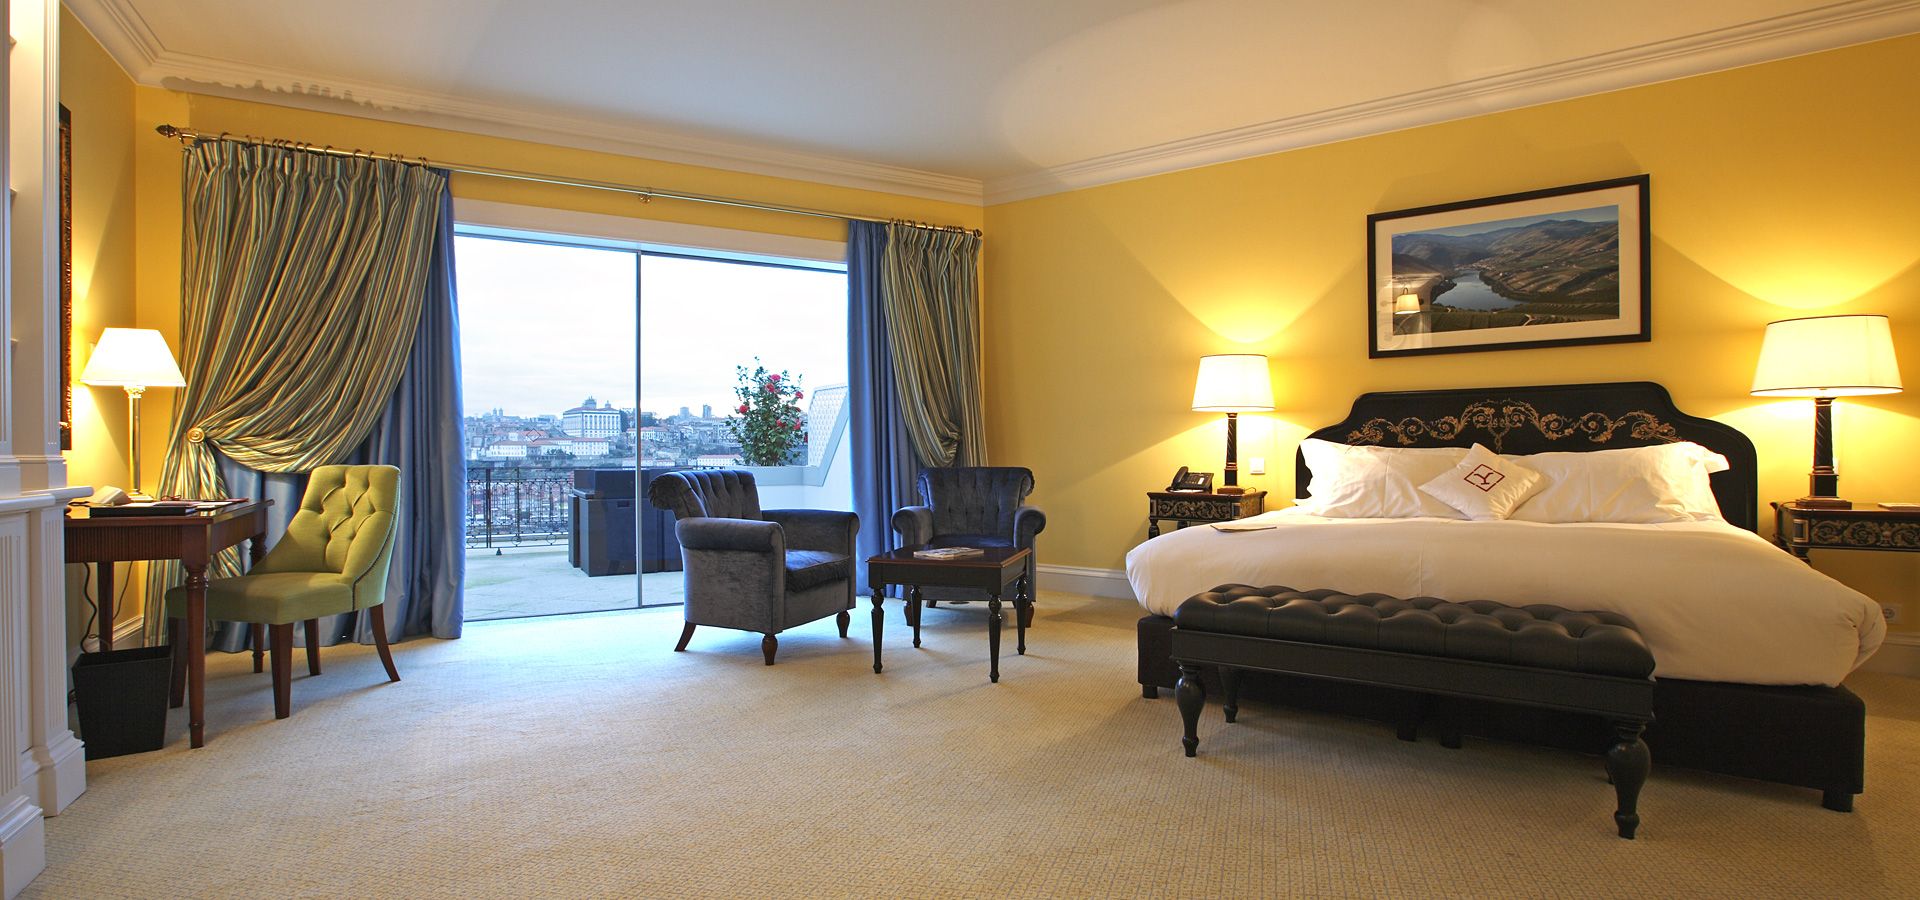 The Gradil Suite at The Yeatman, Porto